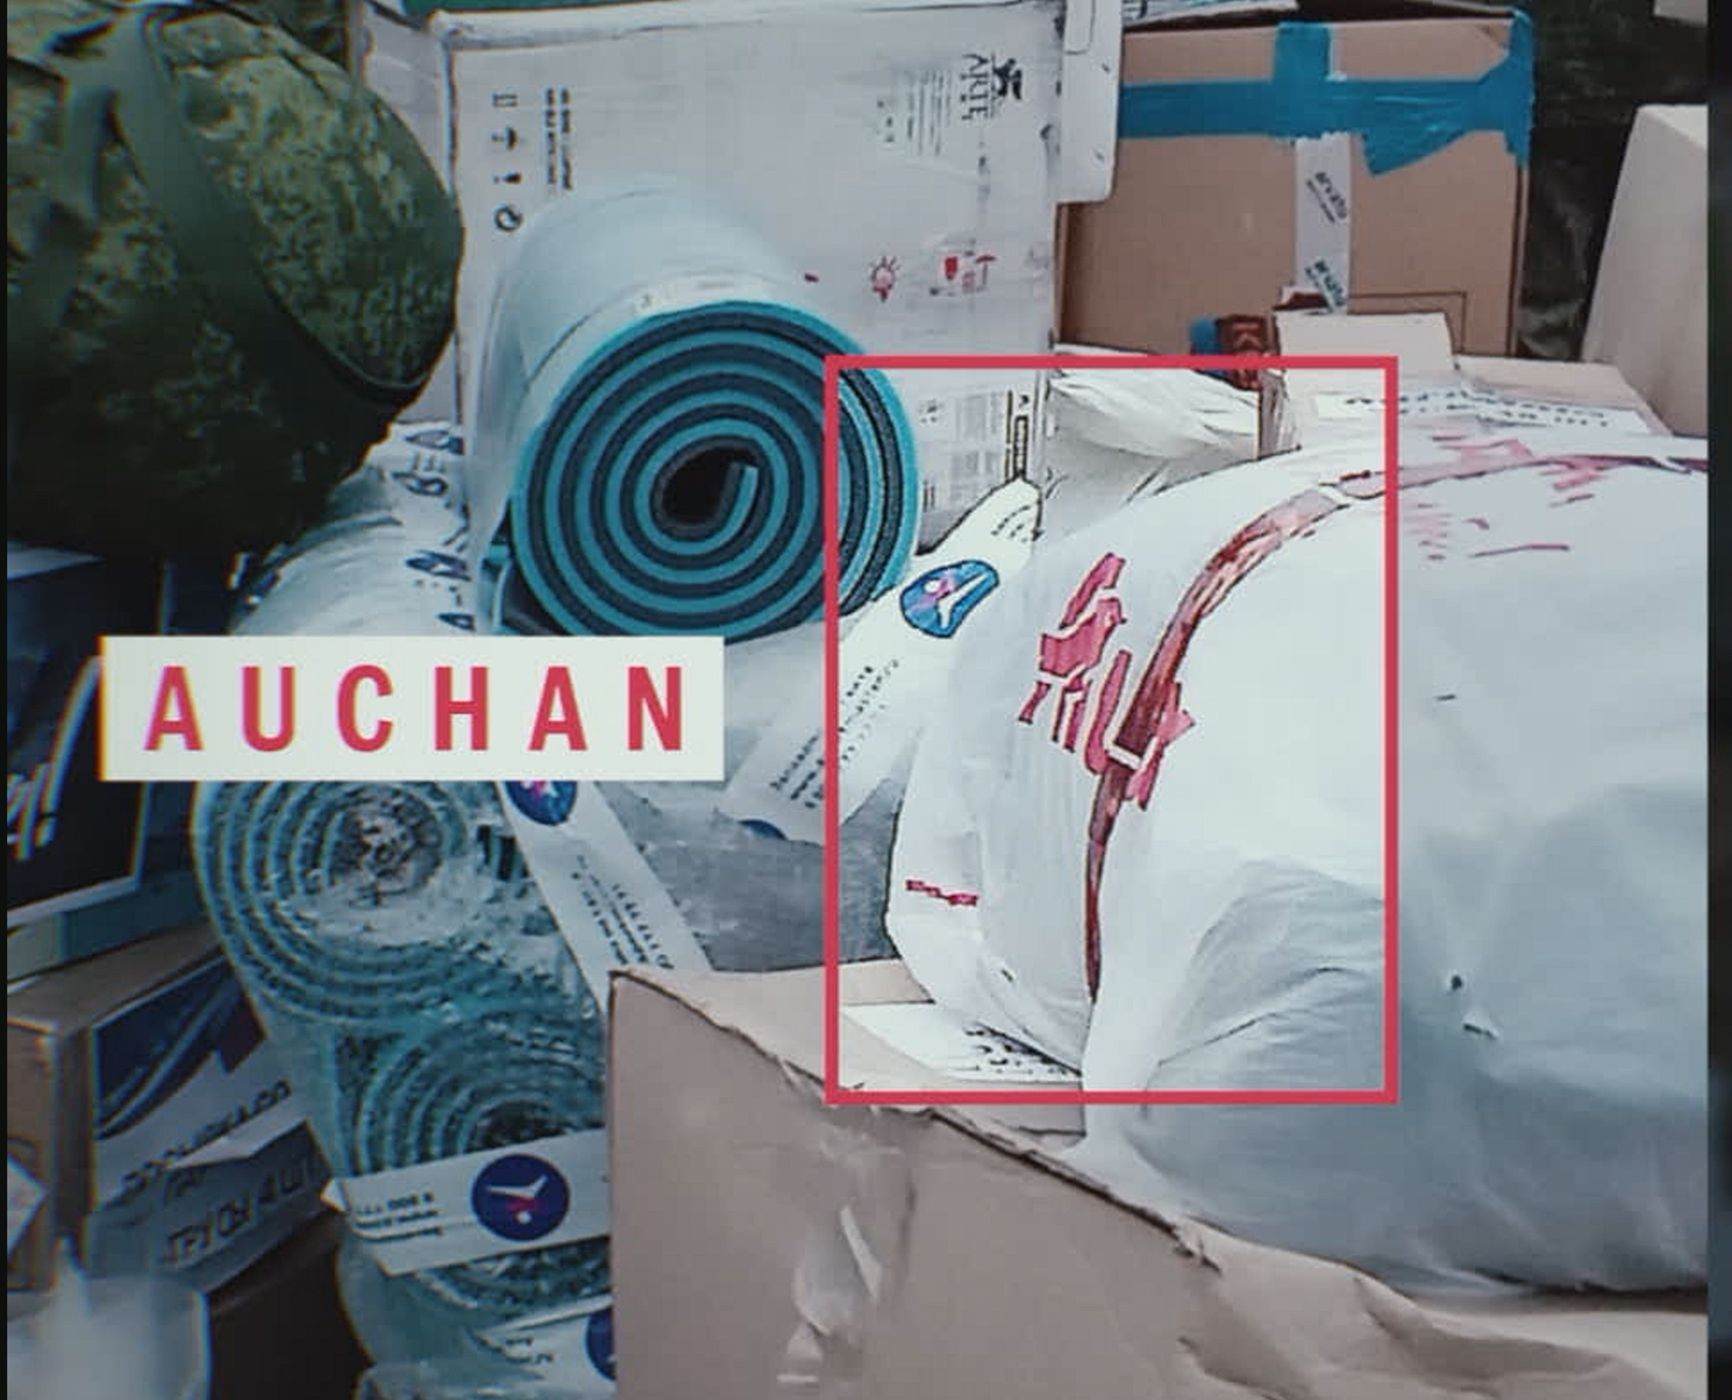 In the video, where the Russian servicemen are thanking volunteers for their help, you can see items in Auchan's branded packaging